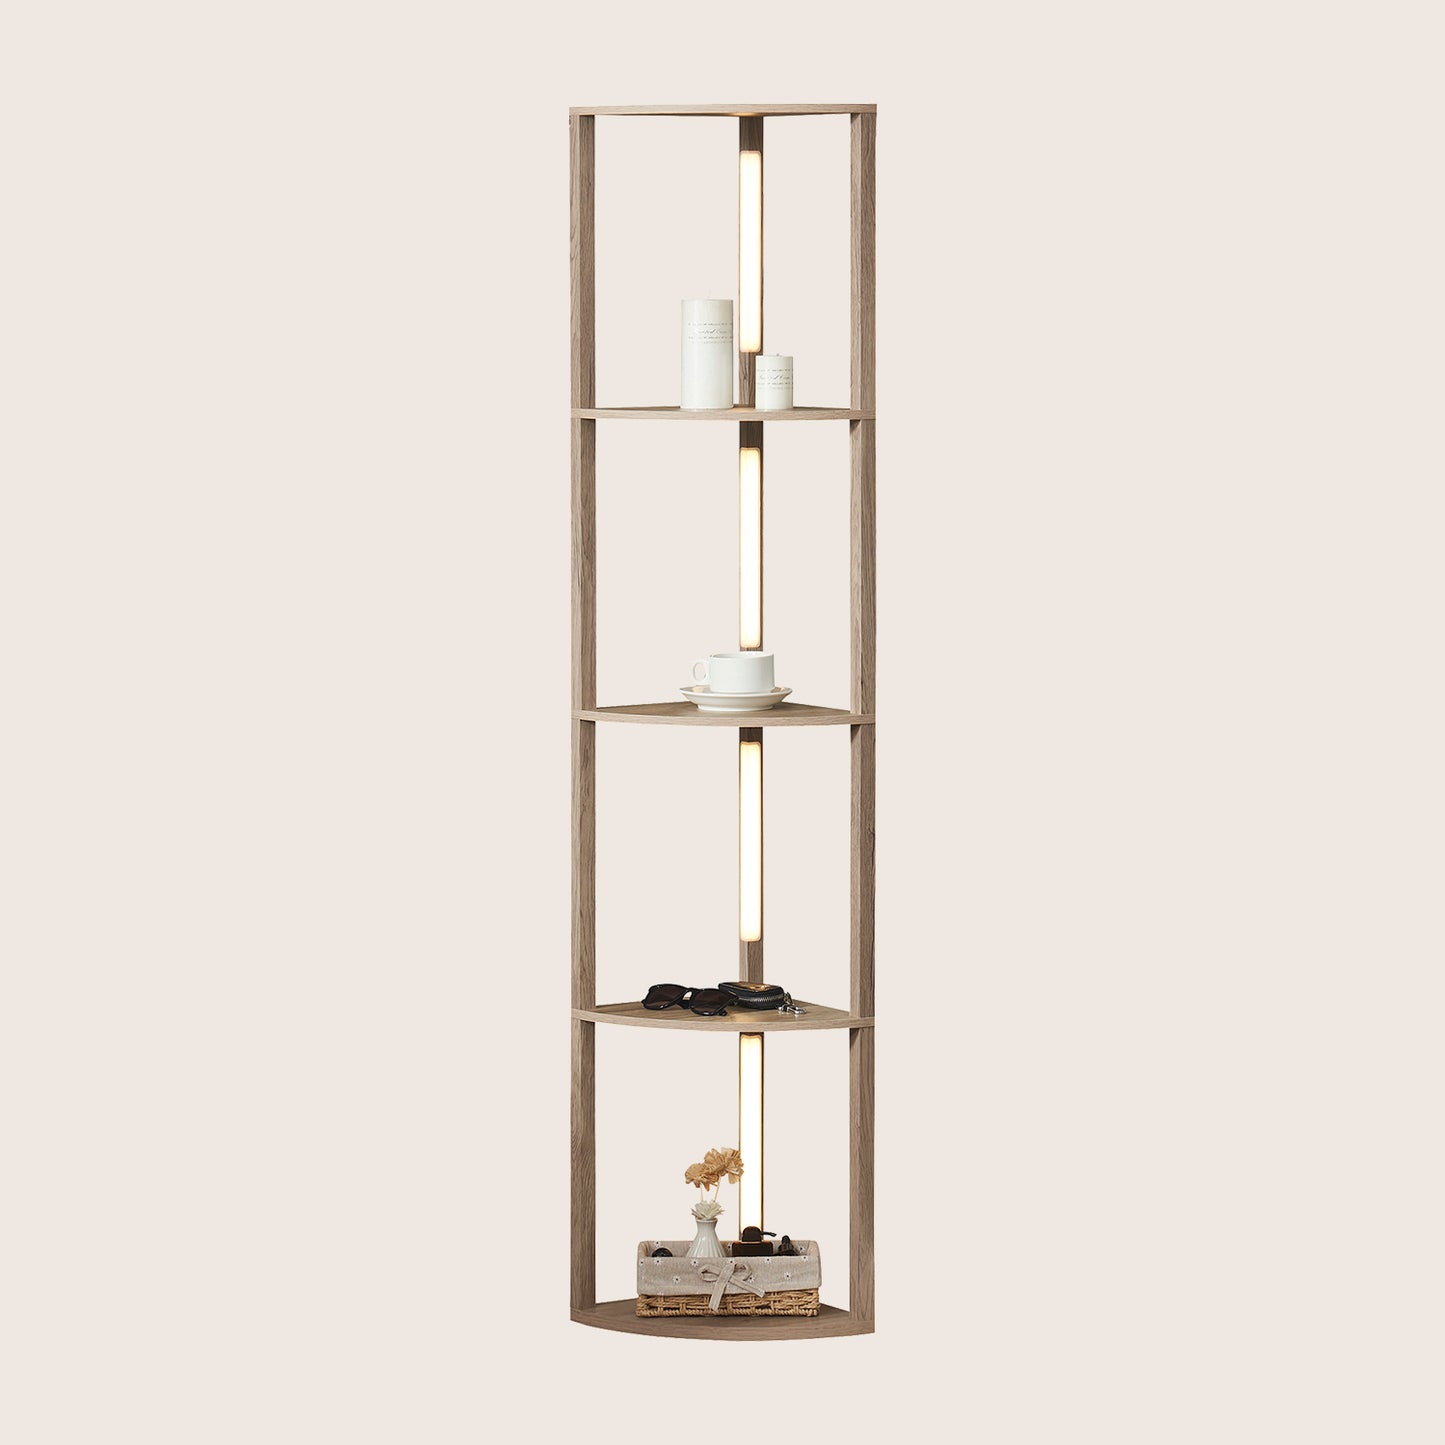 FENLO Fancy Edge Dimmable Corner Display Shelf With Integrated LED Lights